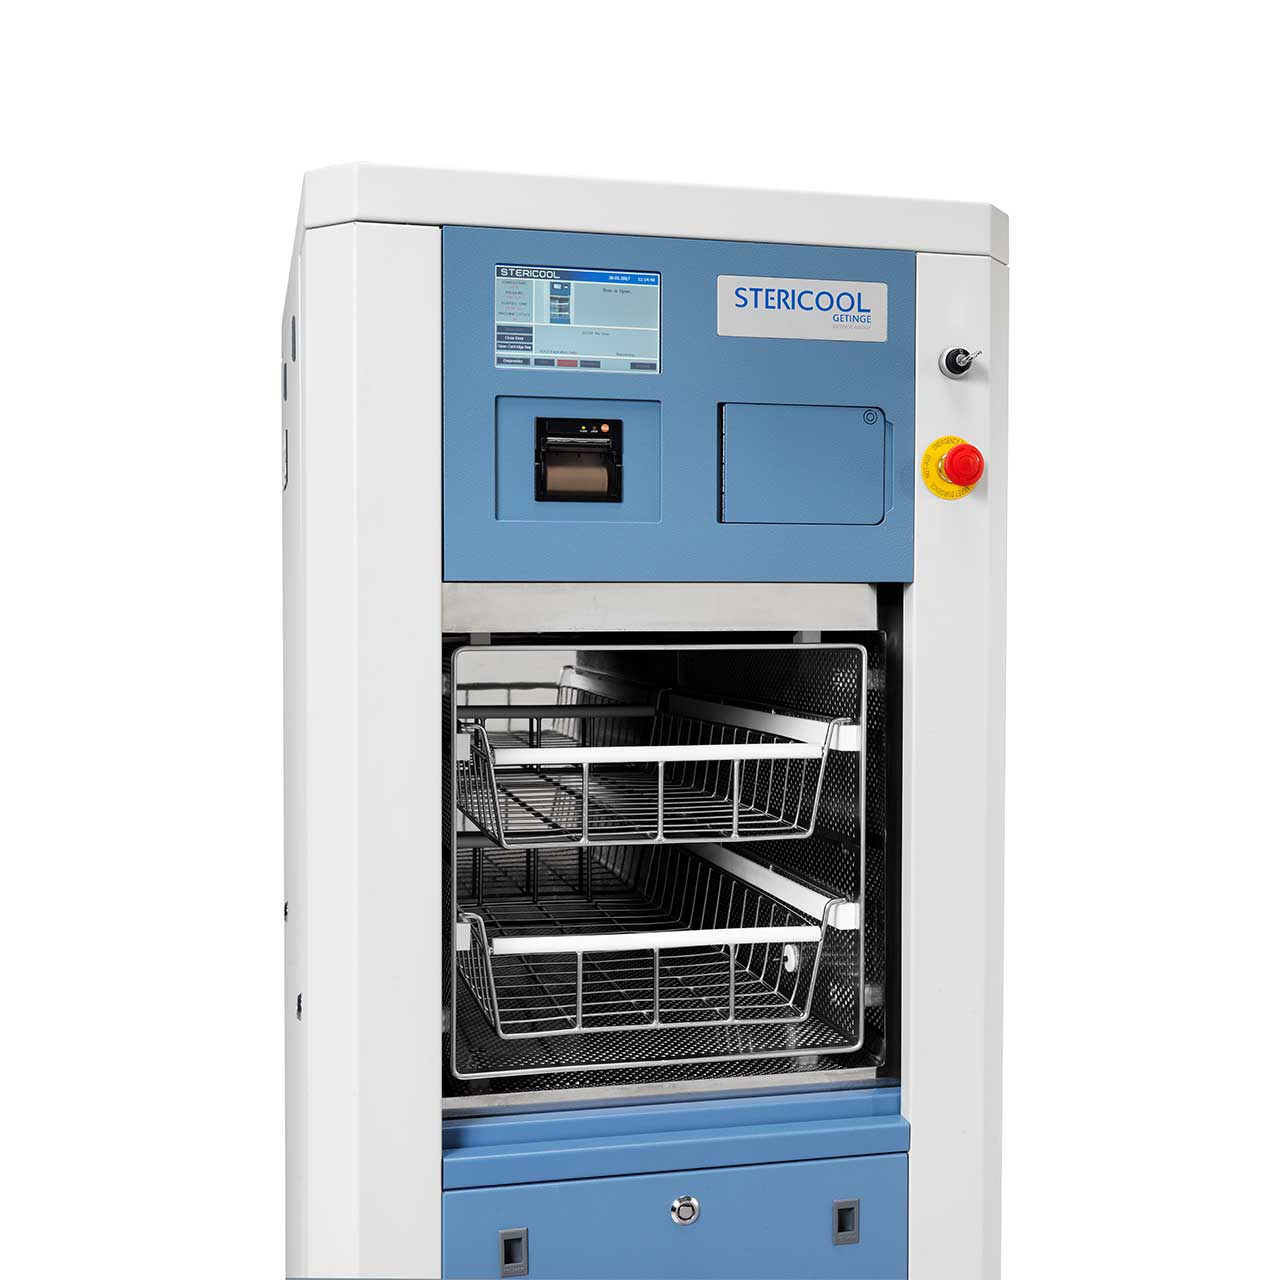 The Stericool sterilizers are Getinge's technologically and yet affordable solution for low temperature sterilization. 